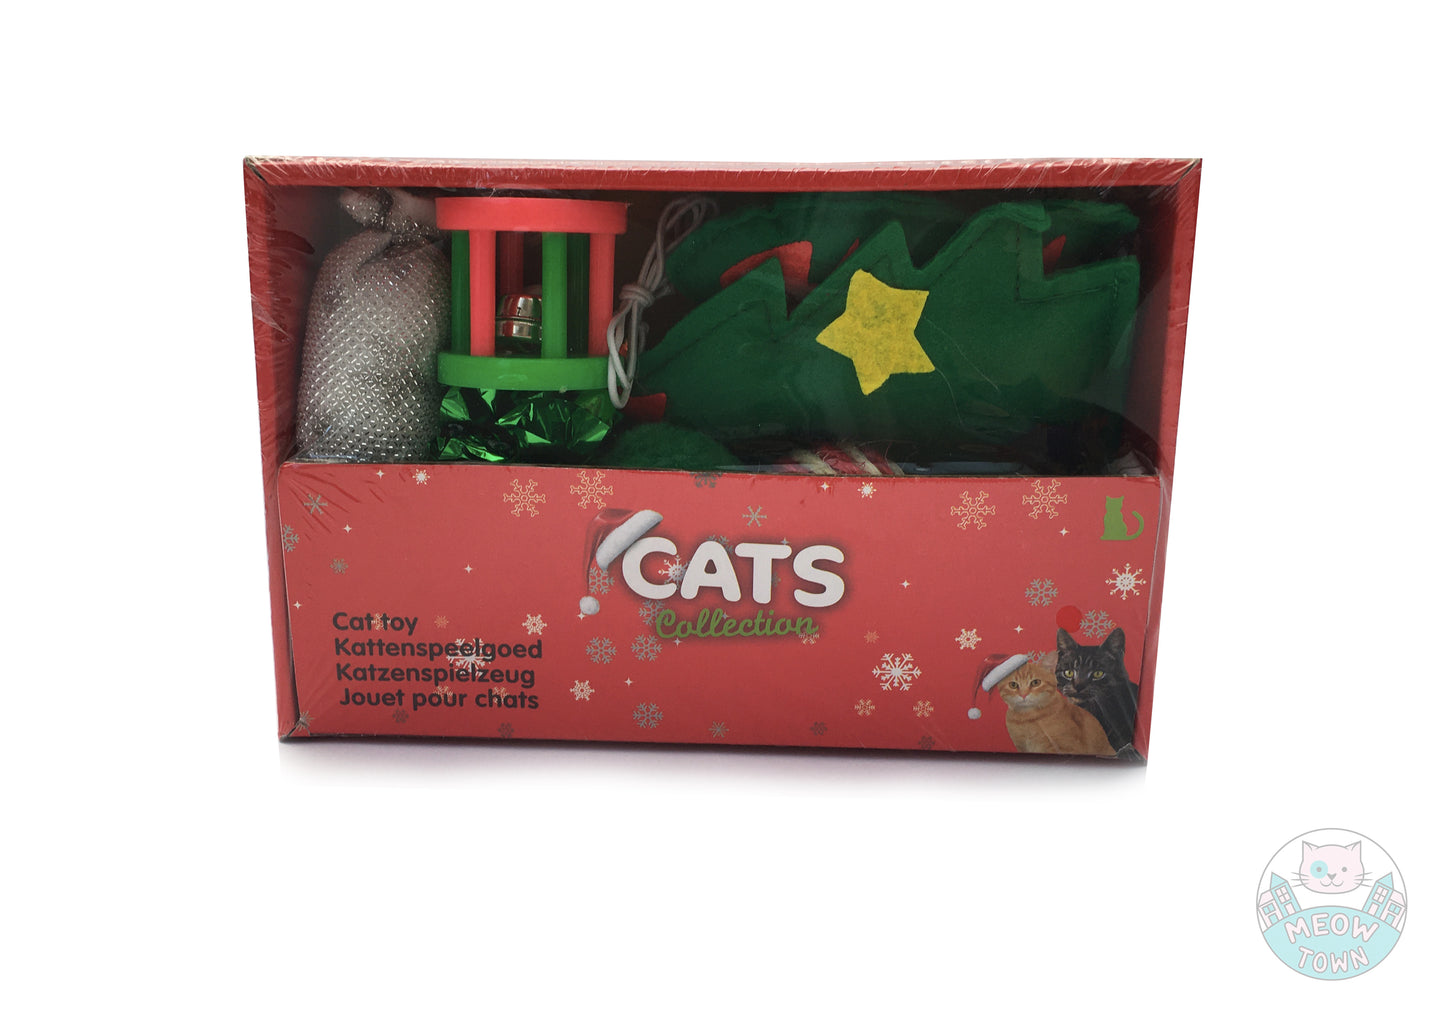 Cat toy box festive christmas present for cats kittens various toy collection